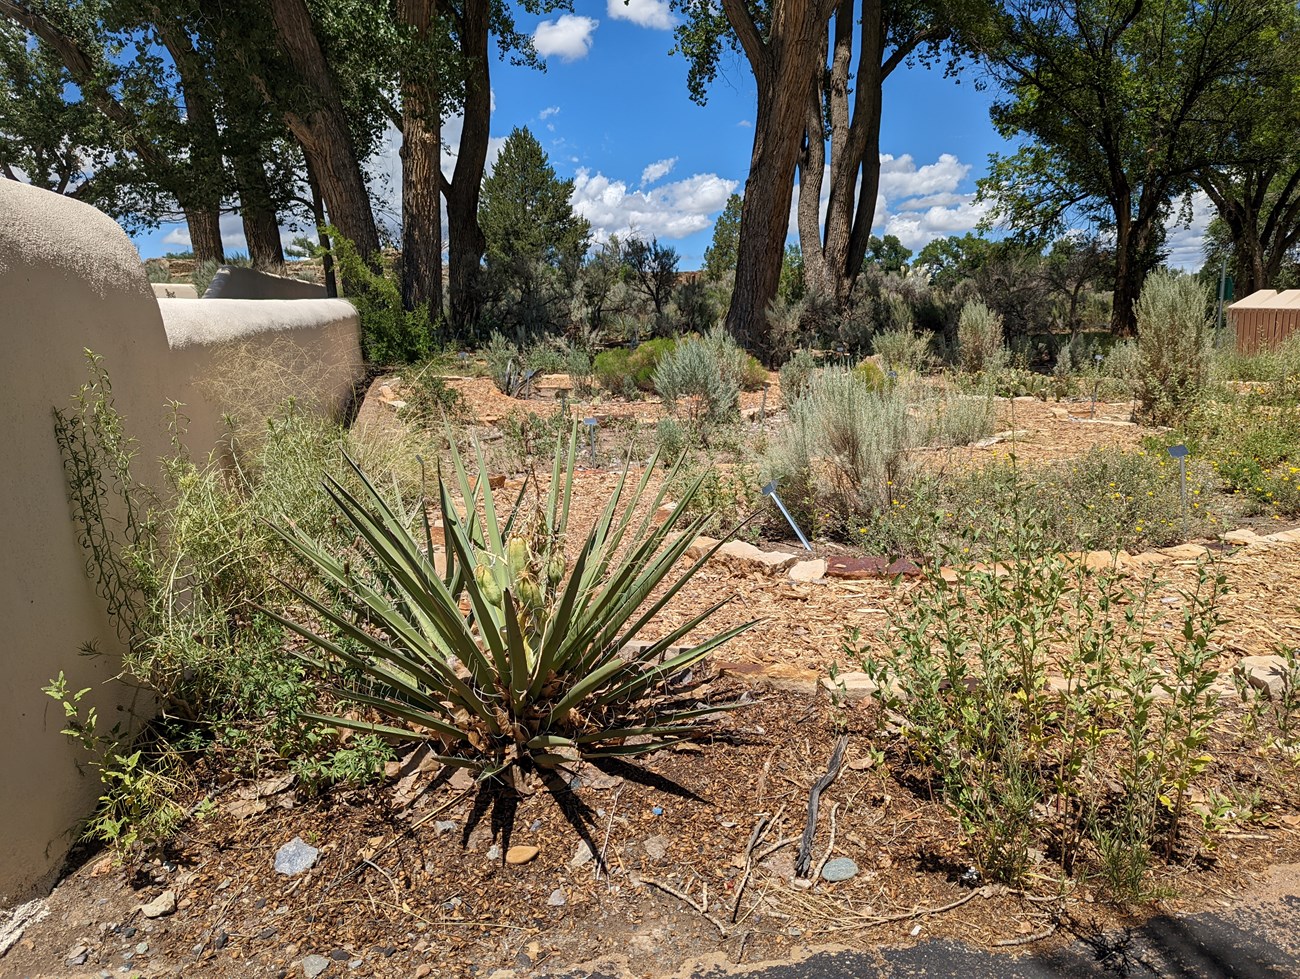 A view of the Native Plant Trail at Aztec Ruins National Monument, with banana yucca in the foreground.